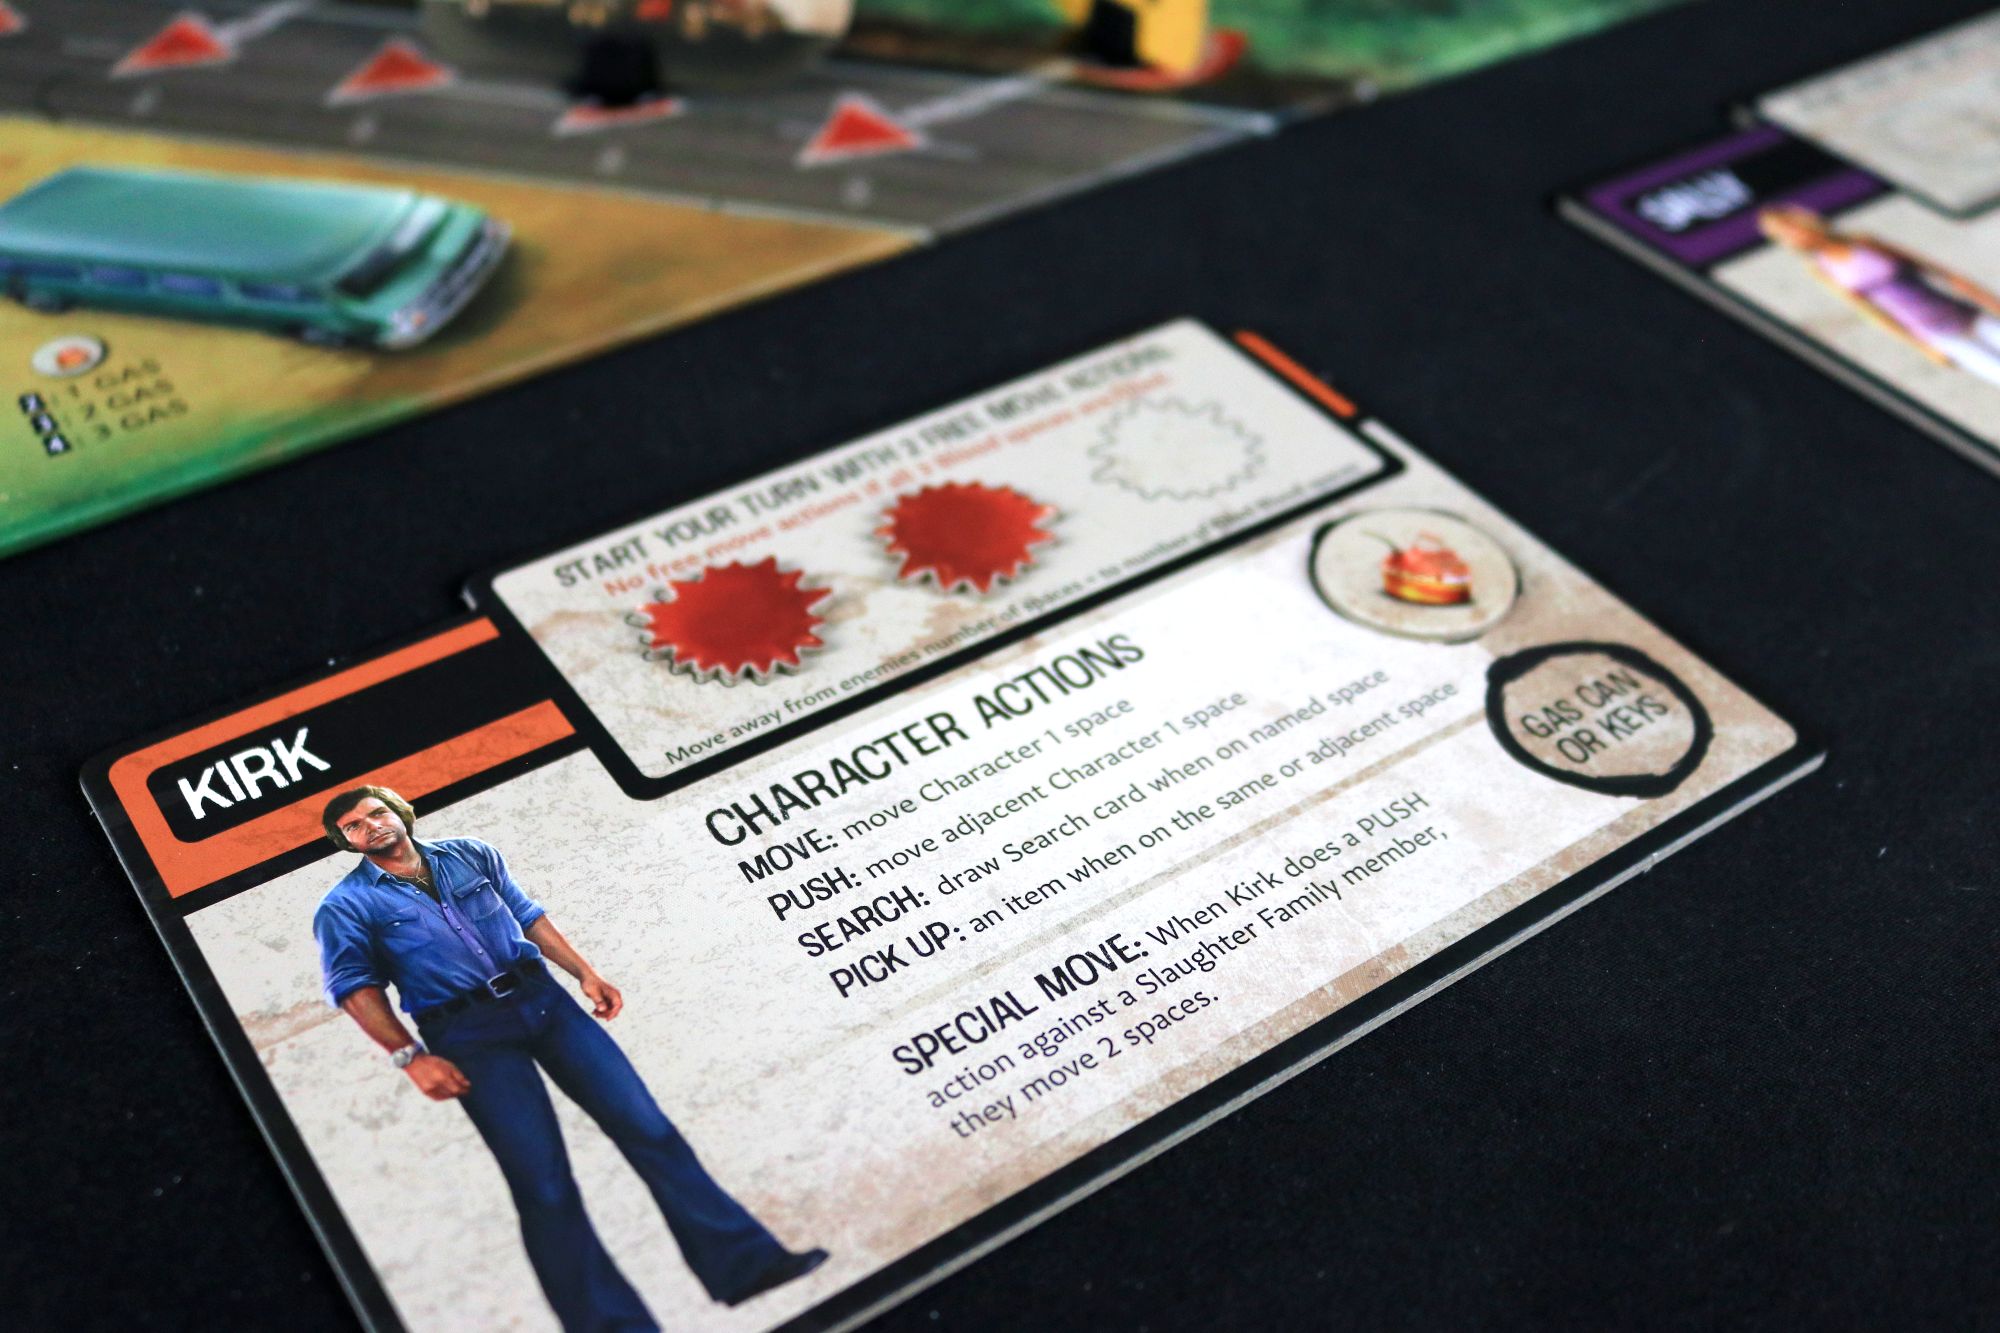 The Texas Chainsaw Massacre Board Game - player card